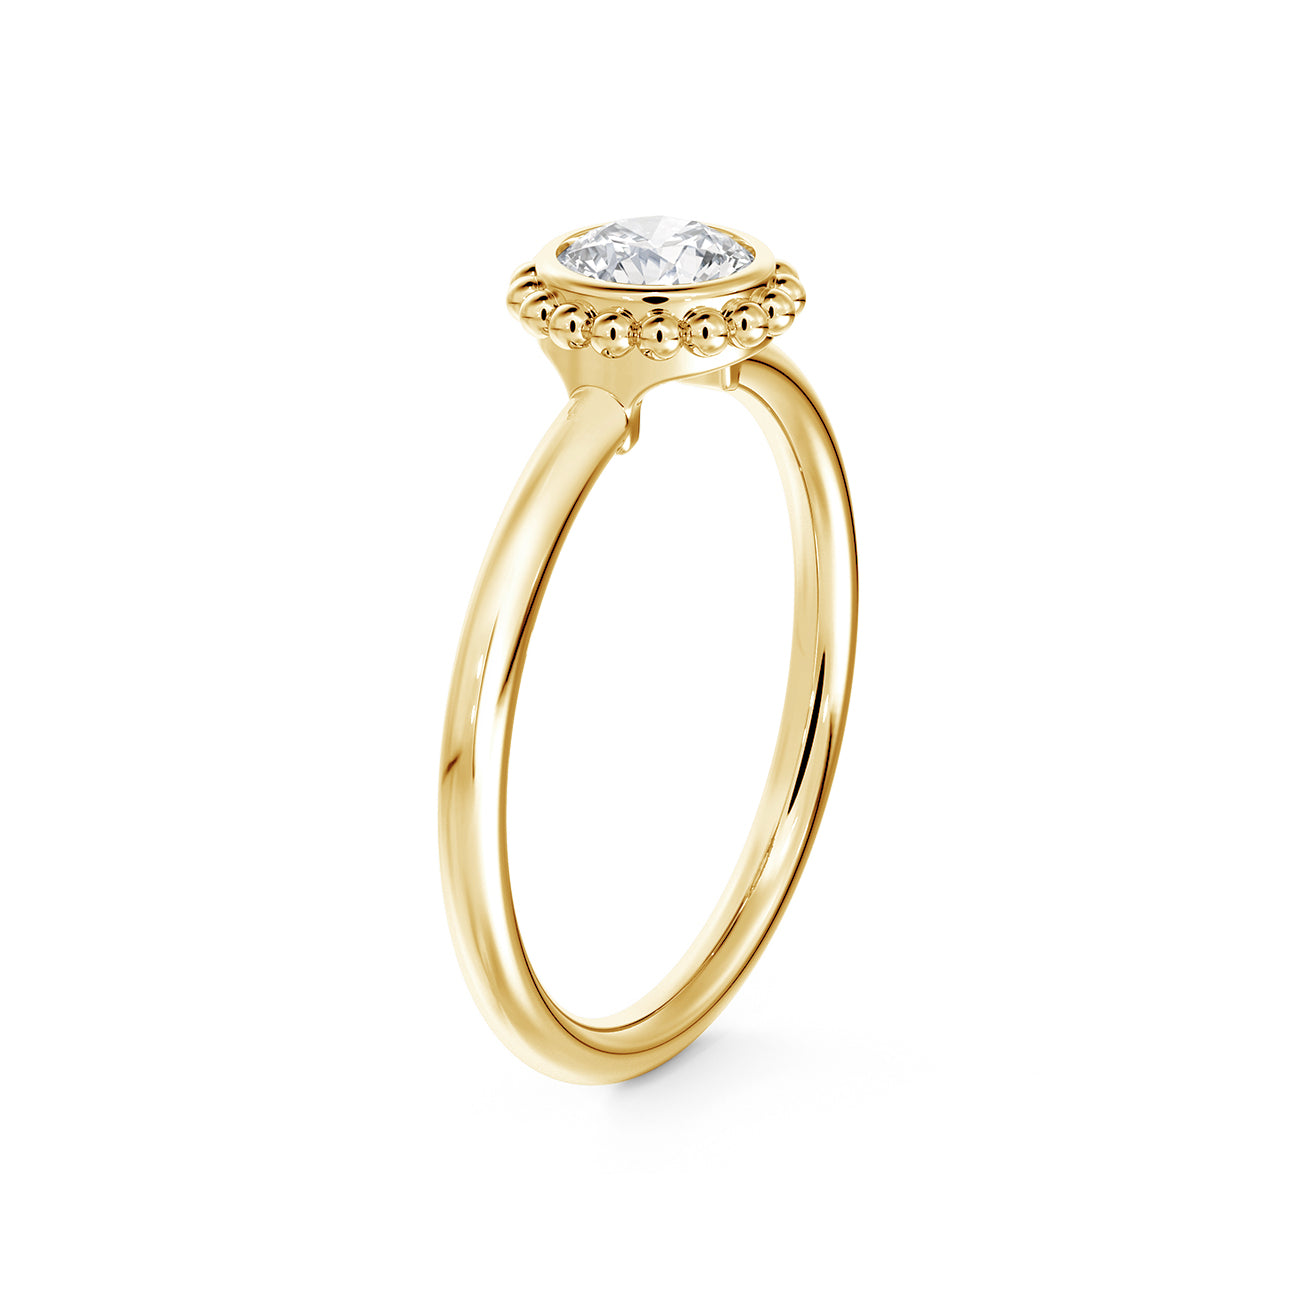 De Beers Forevermark Tribute Yellow Gold Beaded Halo Diamond Ring